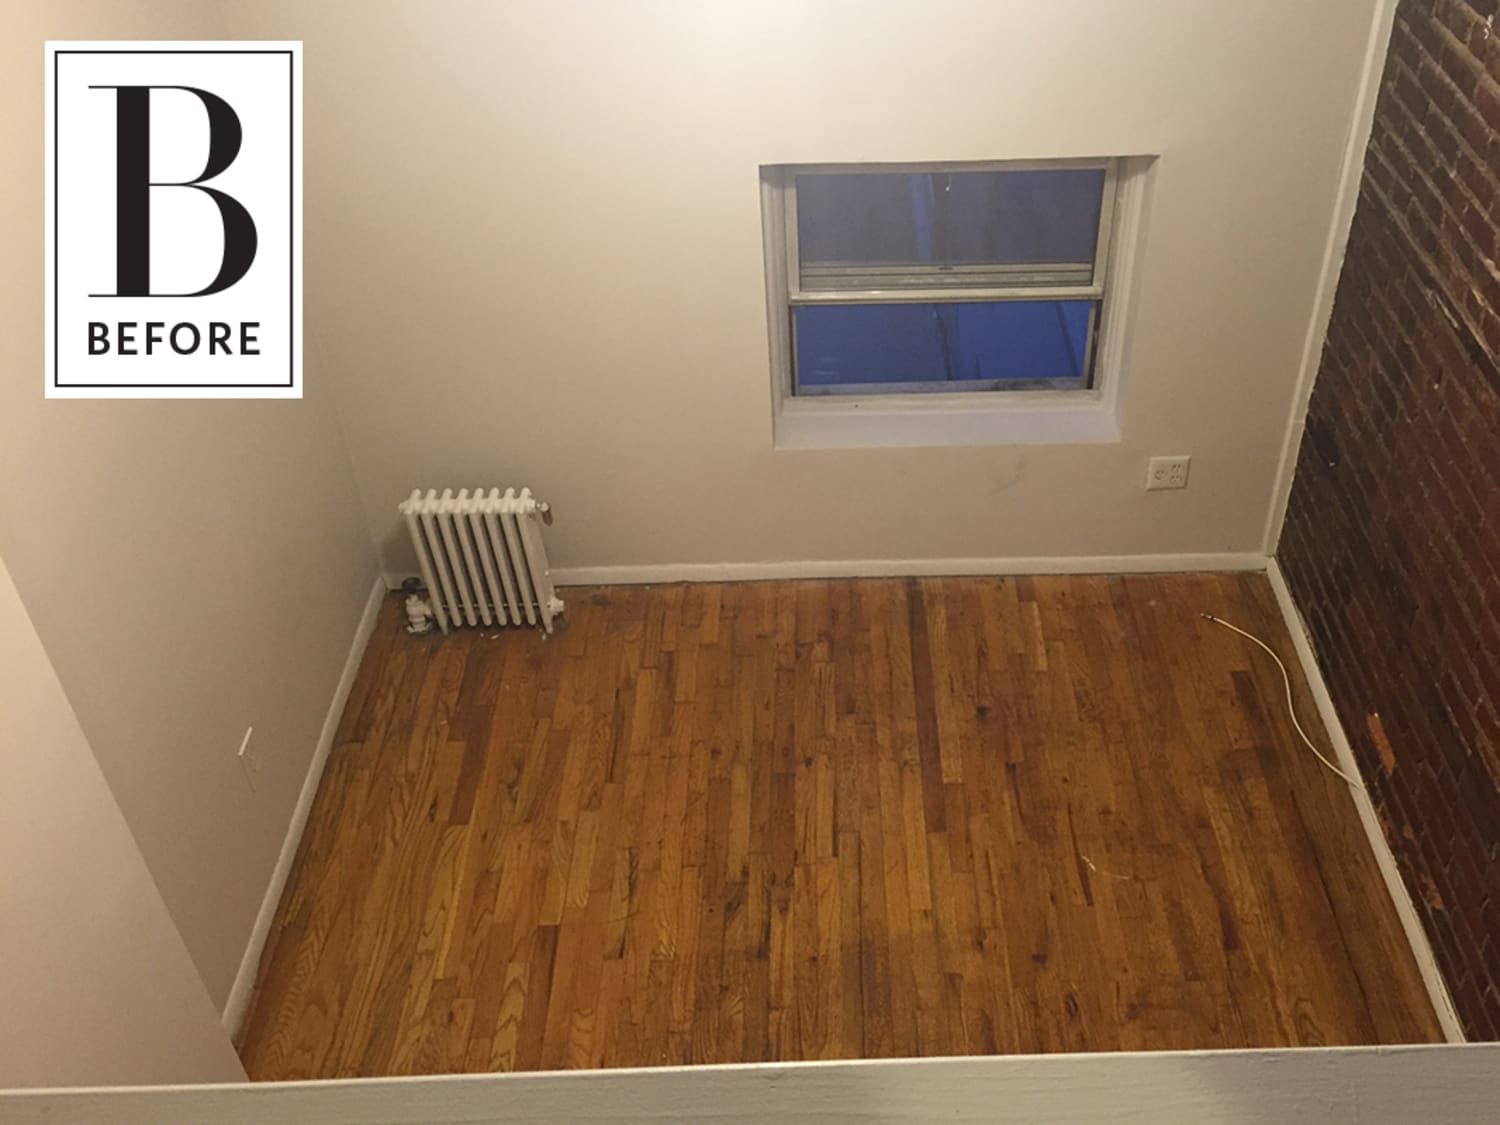 Before After A Blank 250 Square Foot Space Becomes A Cozy Home Apartment Therapy